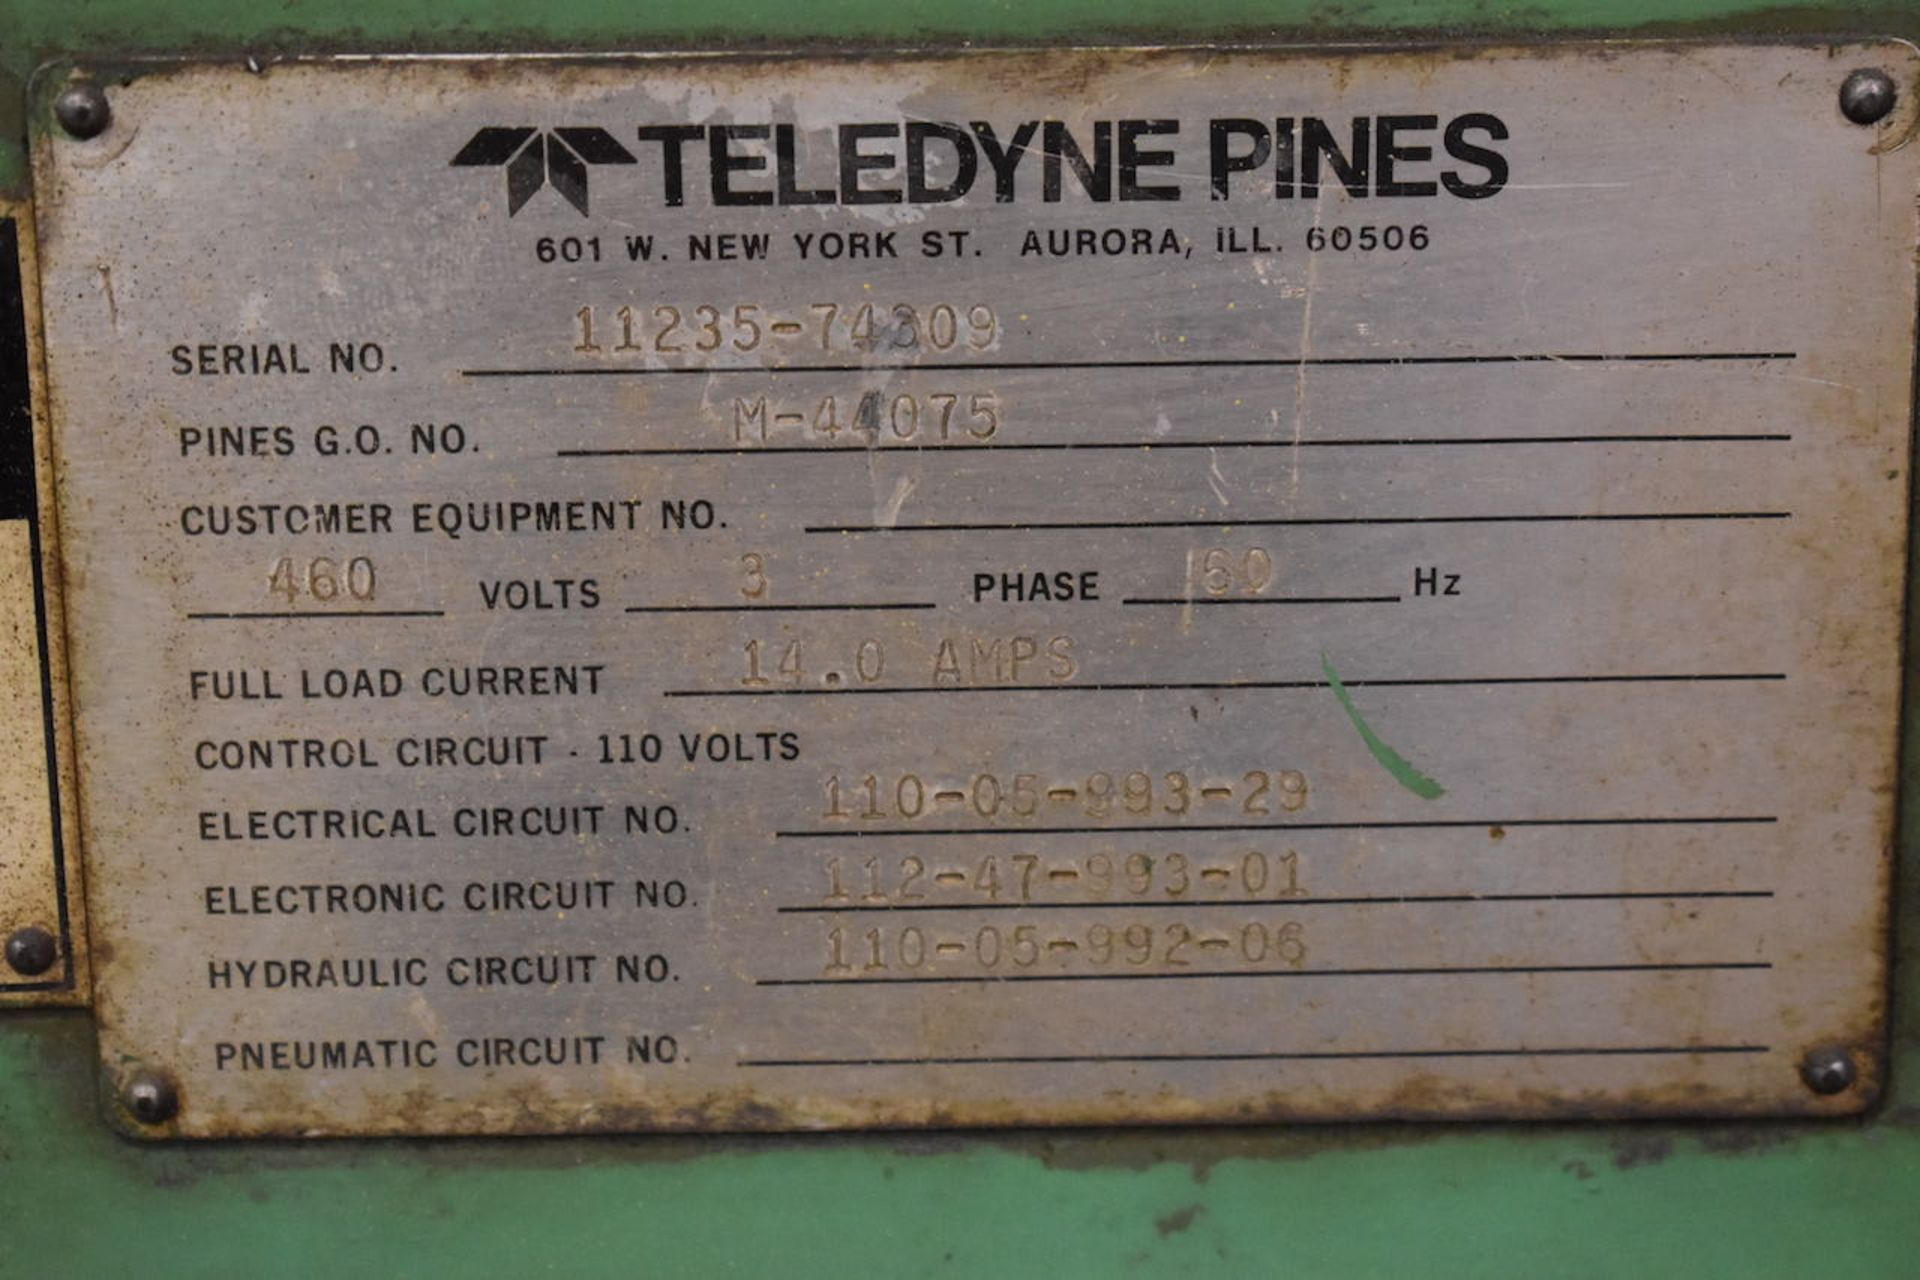 Pines 42 ft. (approx.) Cap. No. 2 Tube Bender, S/N 11235 74309/M-4405, Dial-A-Bend Controls, with - Image 4 of 9